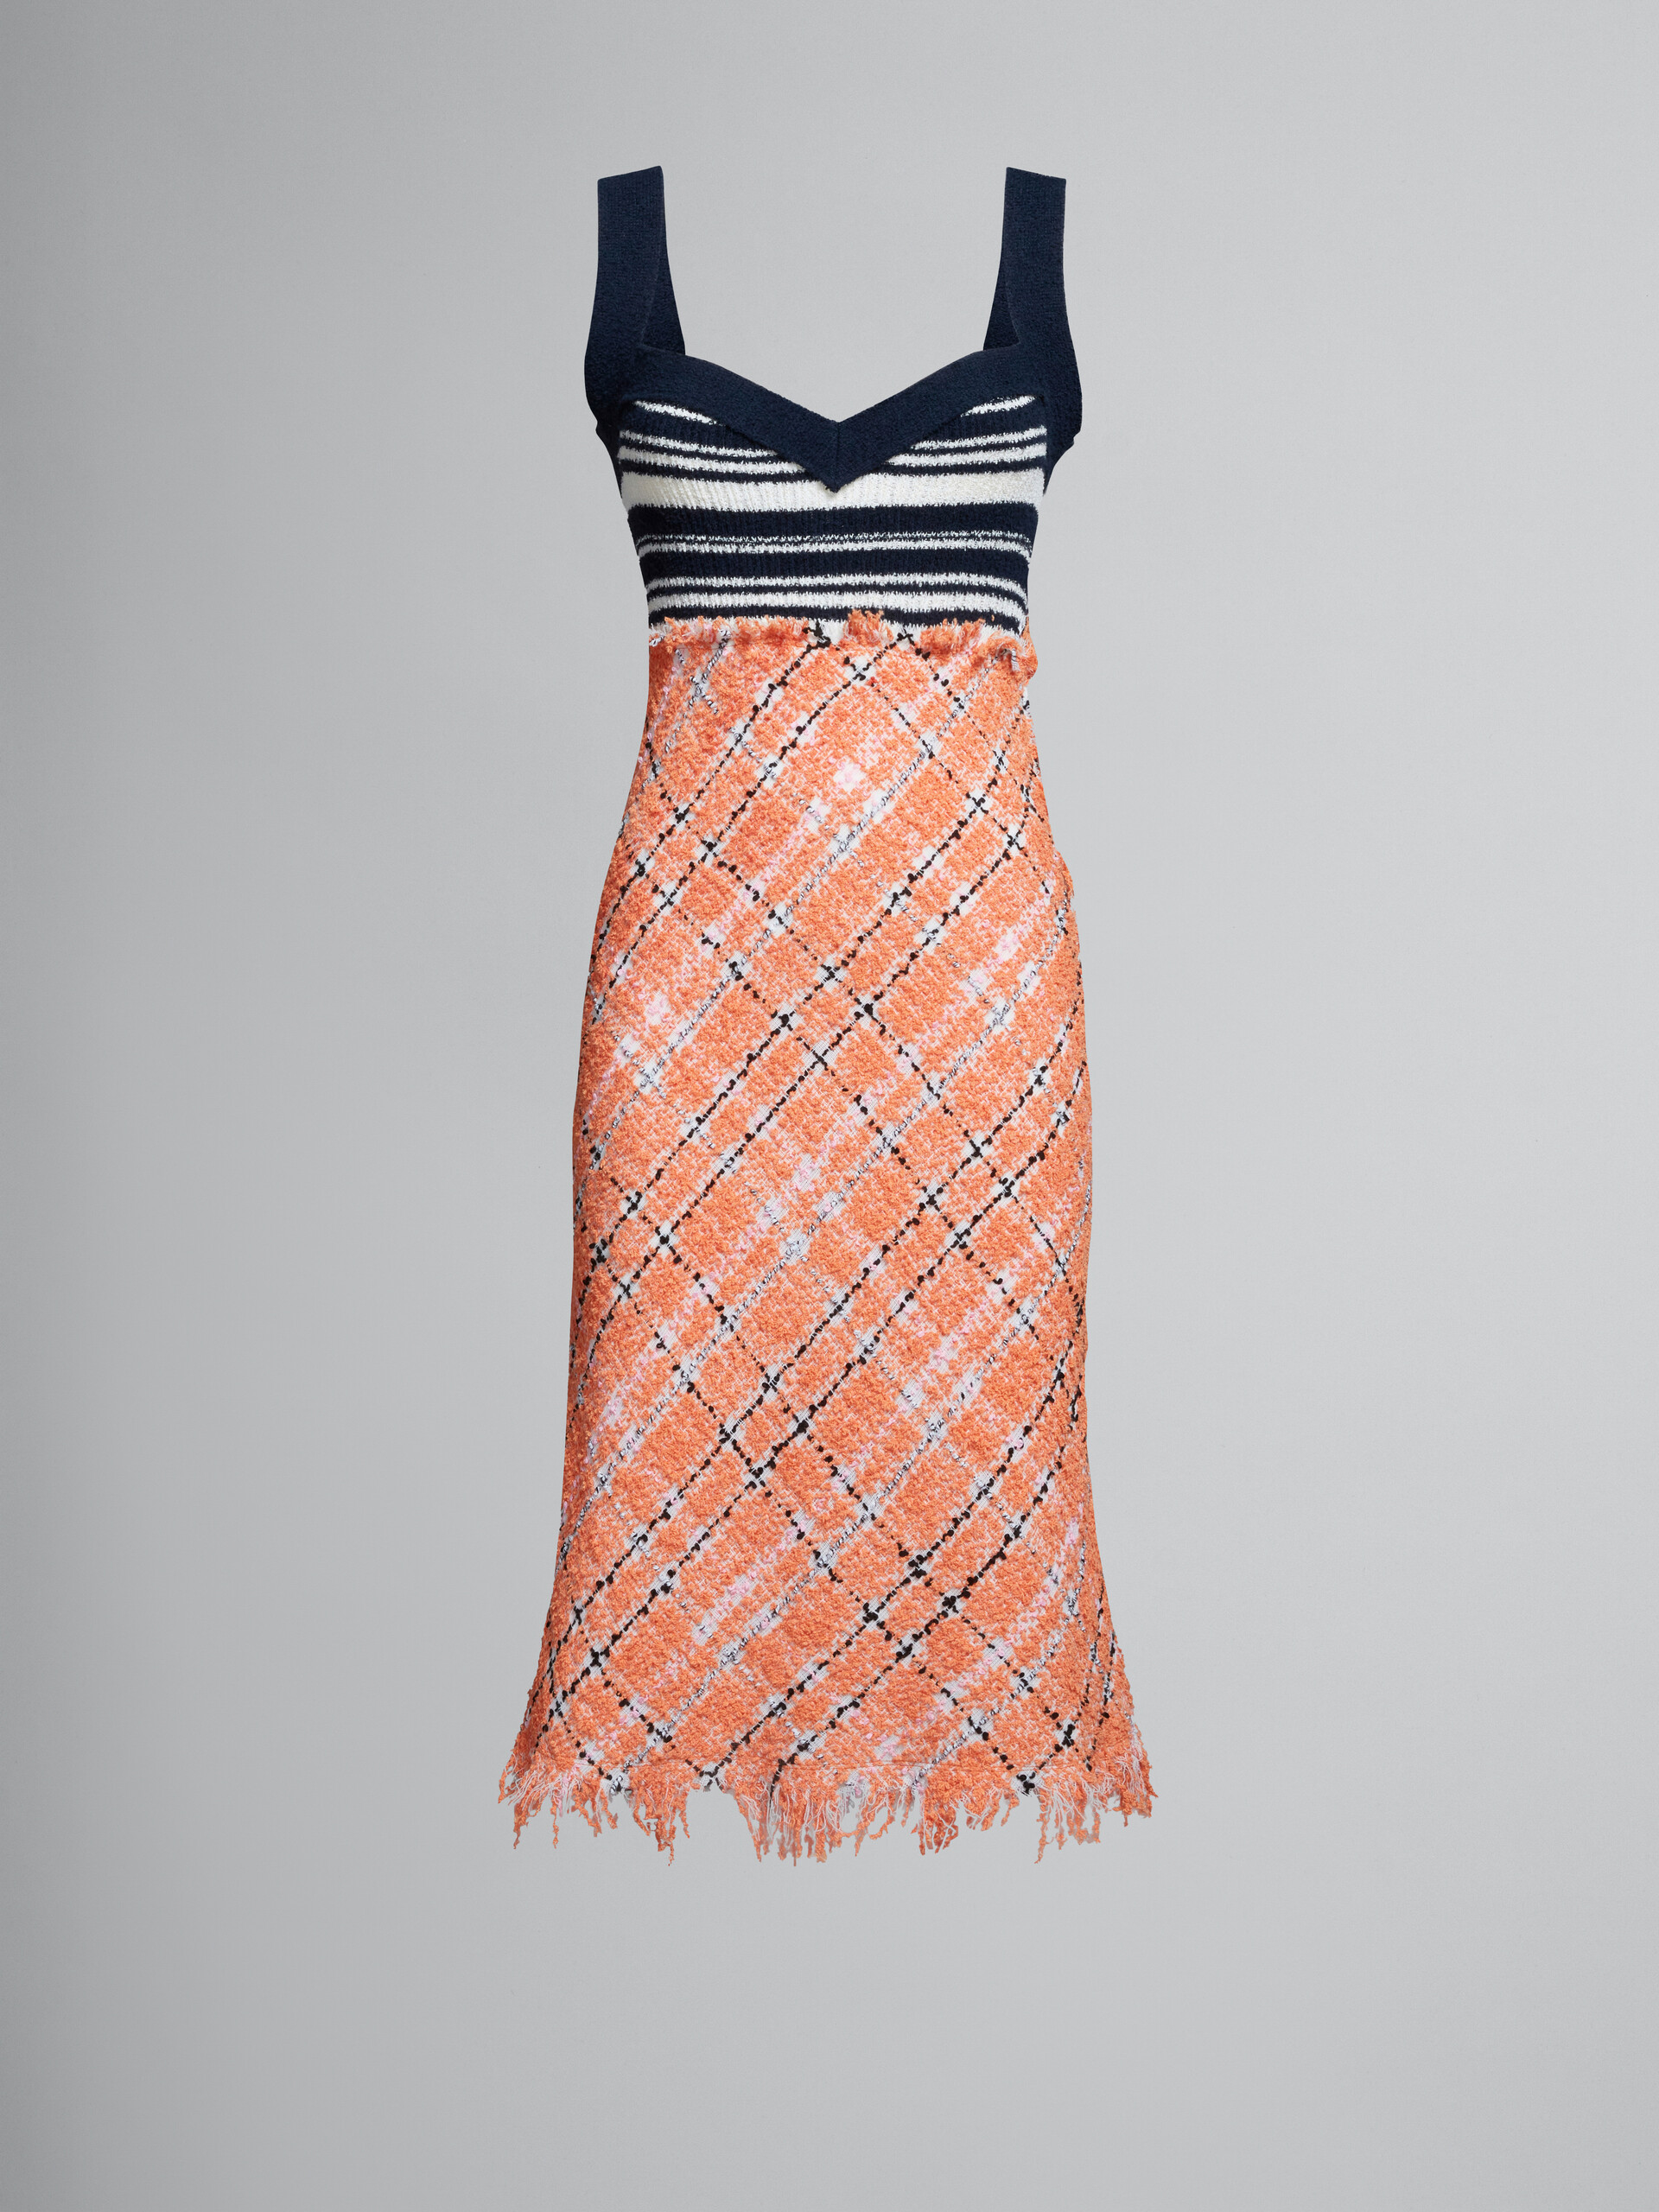 Cotton tweed dress with knitted top - Dresses - Image 1